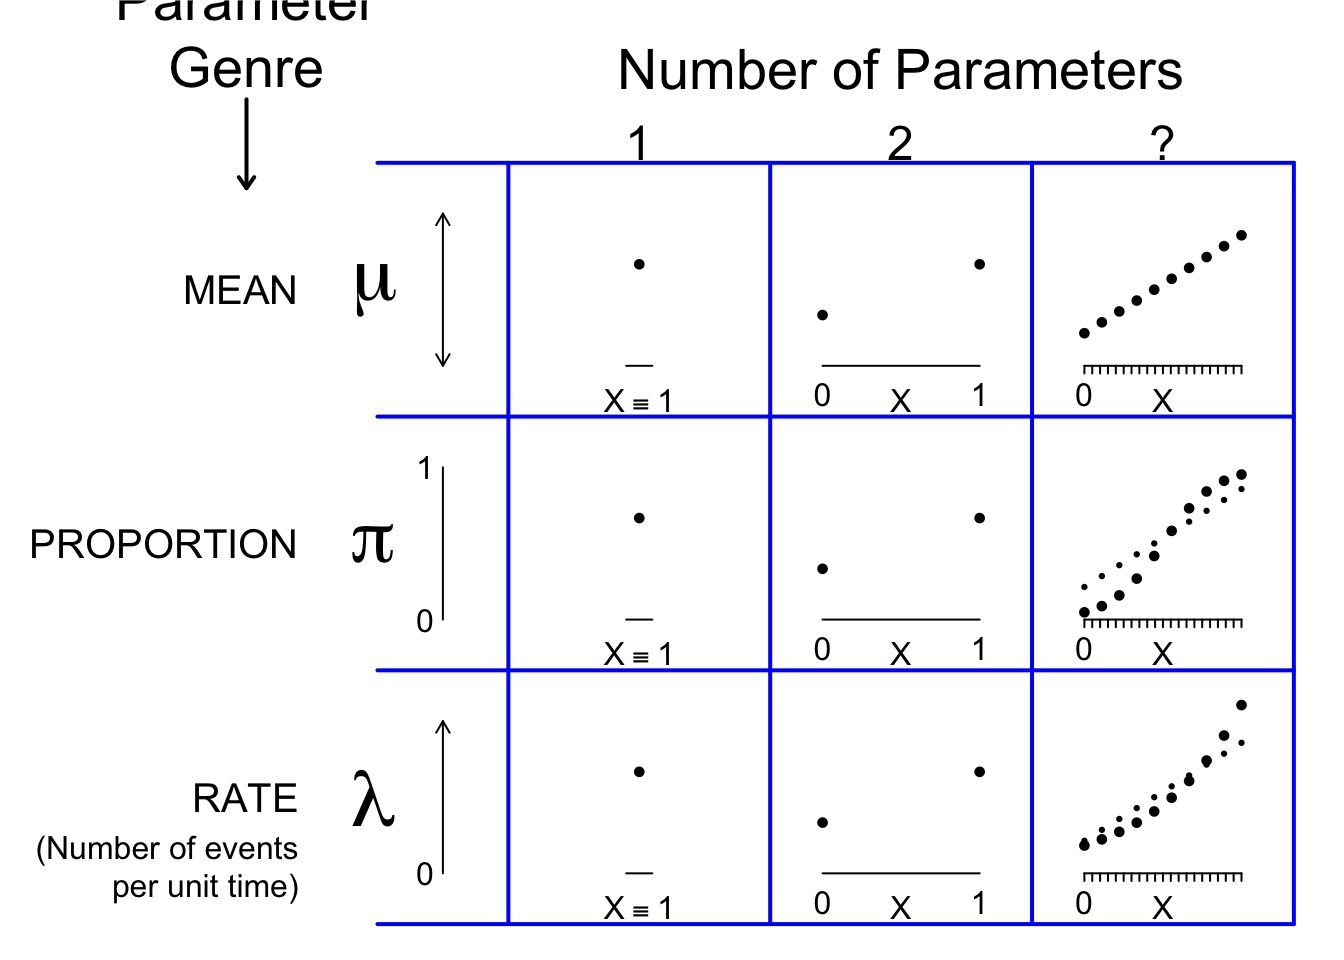 Grid of parameter contrasts that we aim to cover in this course.